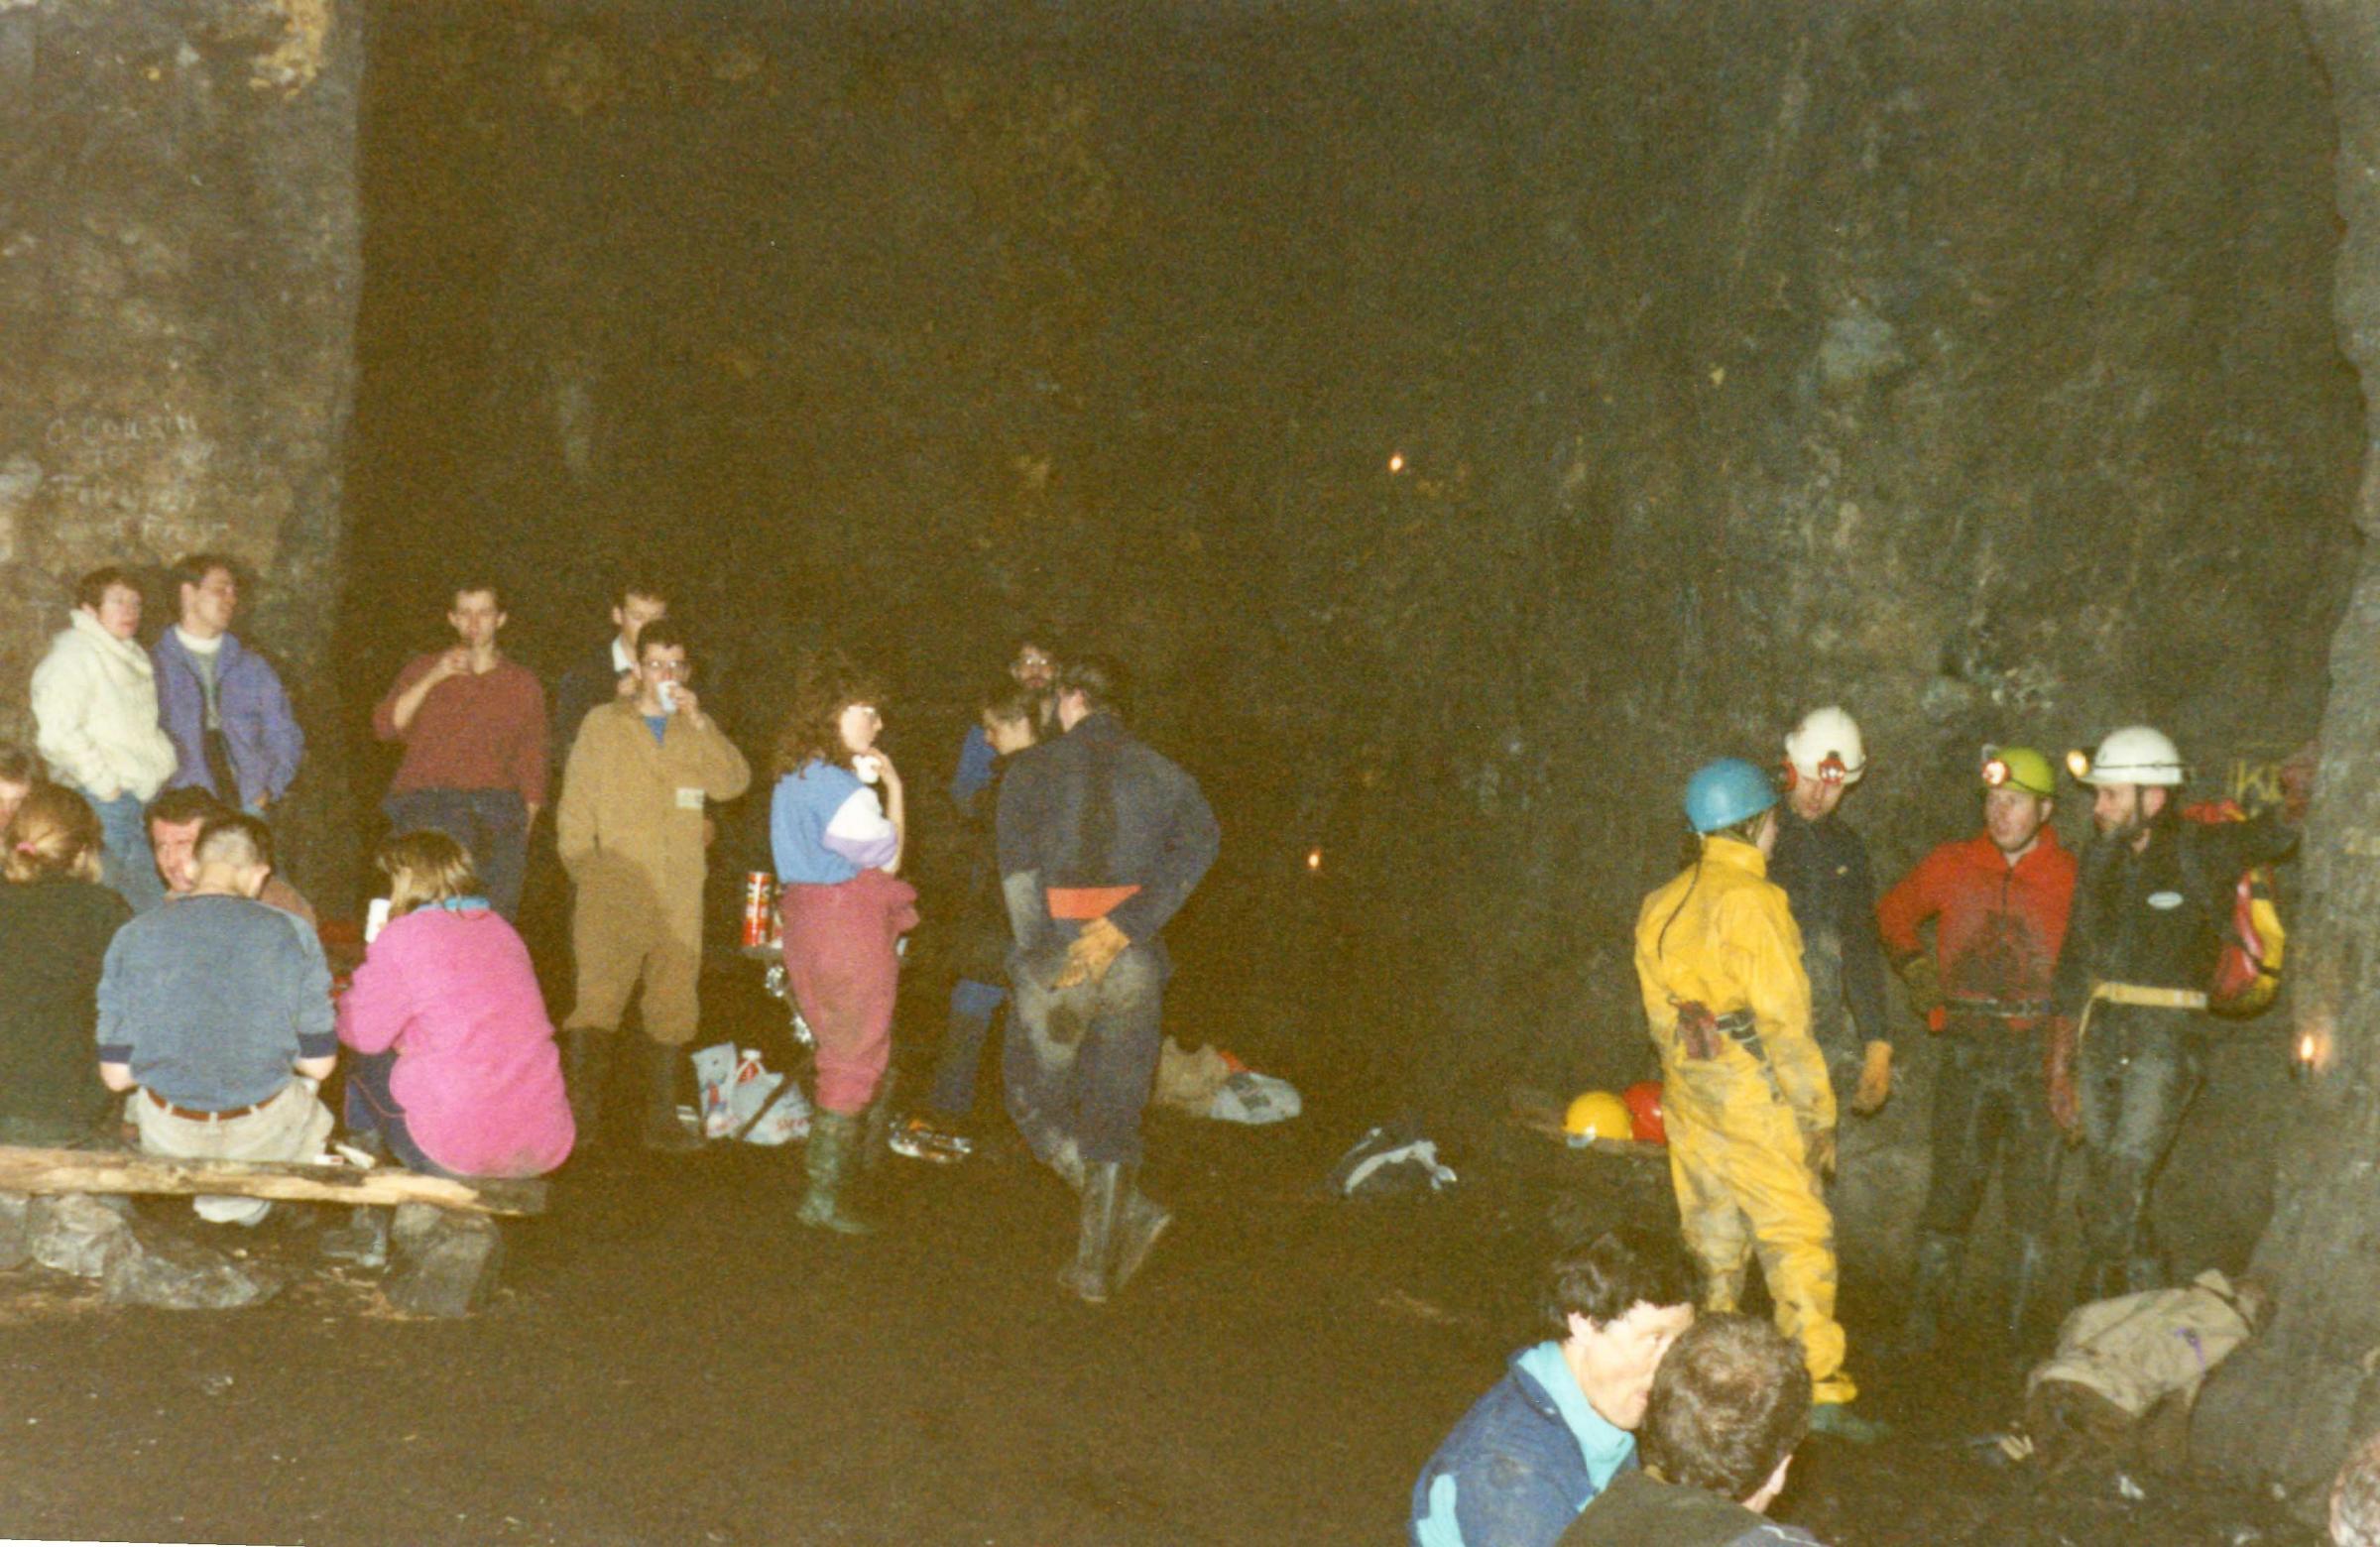 Underground in the Ballroom Flat - a mined cavern so vast that in 1901 a dinner party was held down there